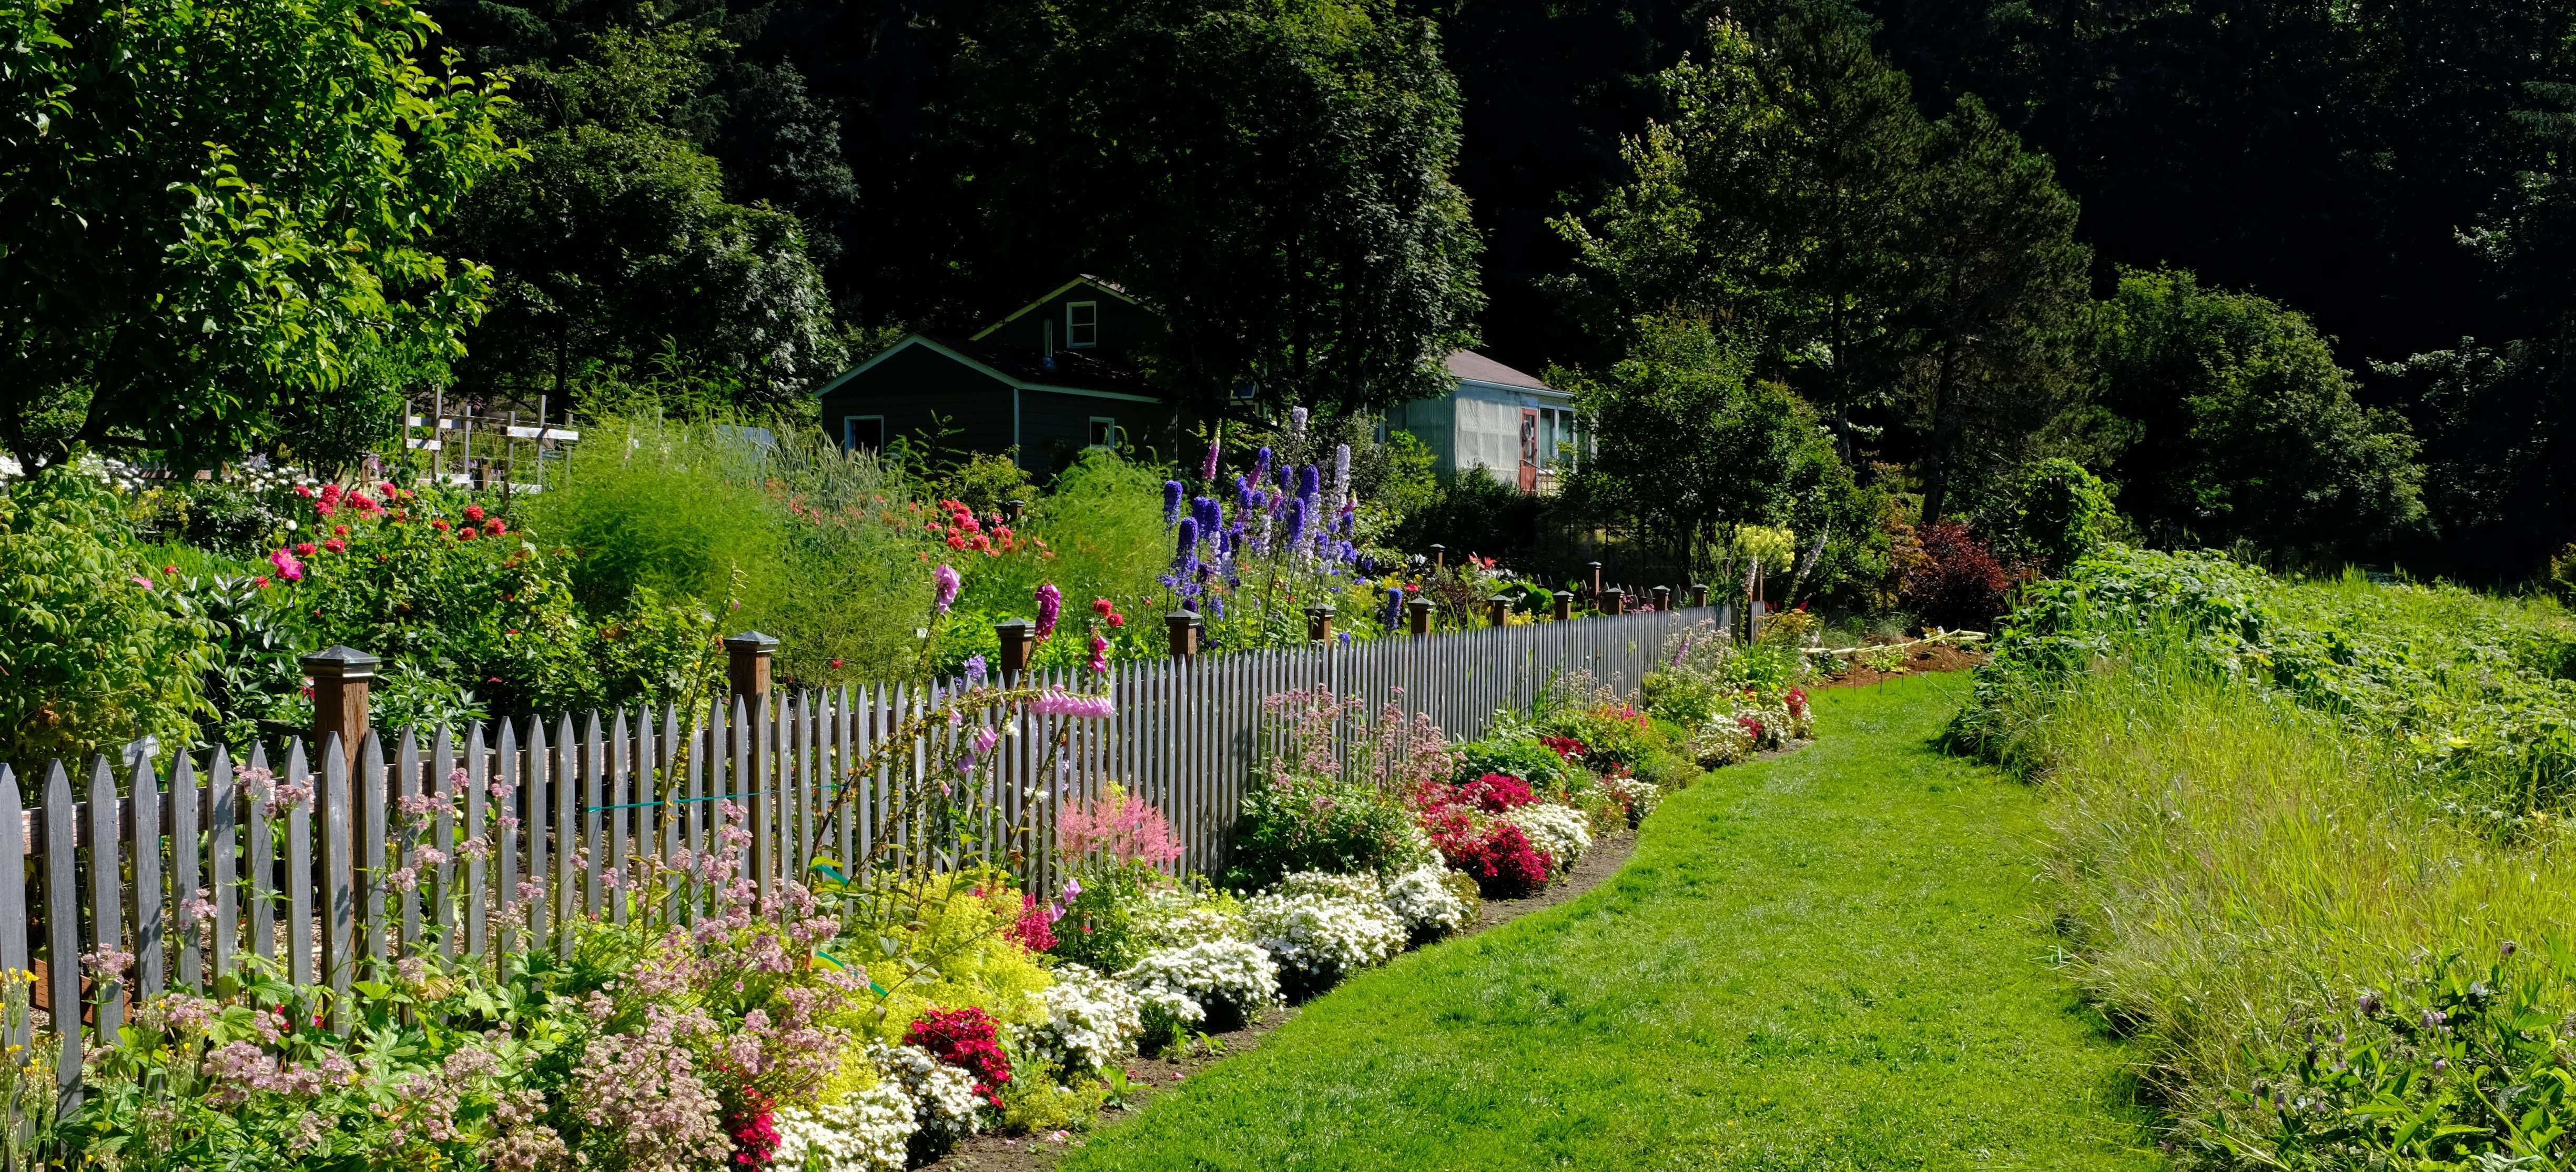 Fence with manicured flower beds and lawn pathway at the arboretum.